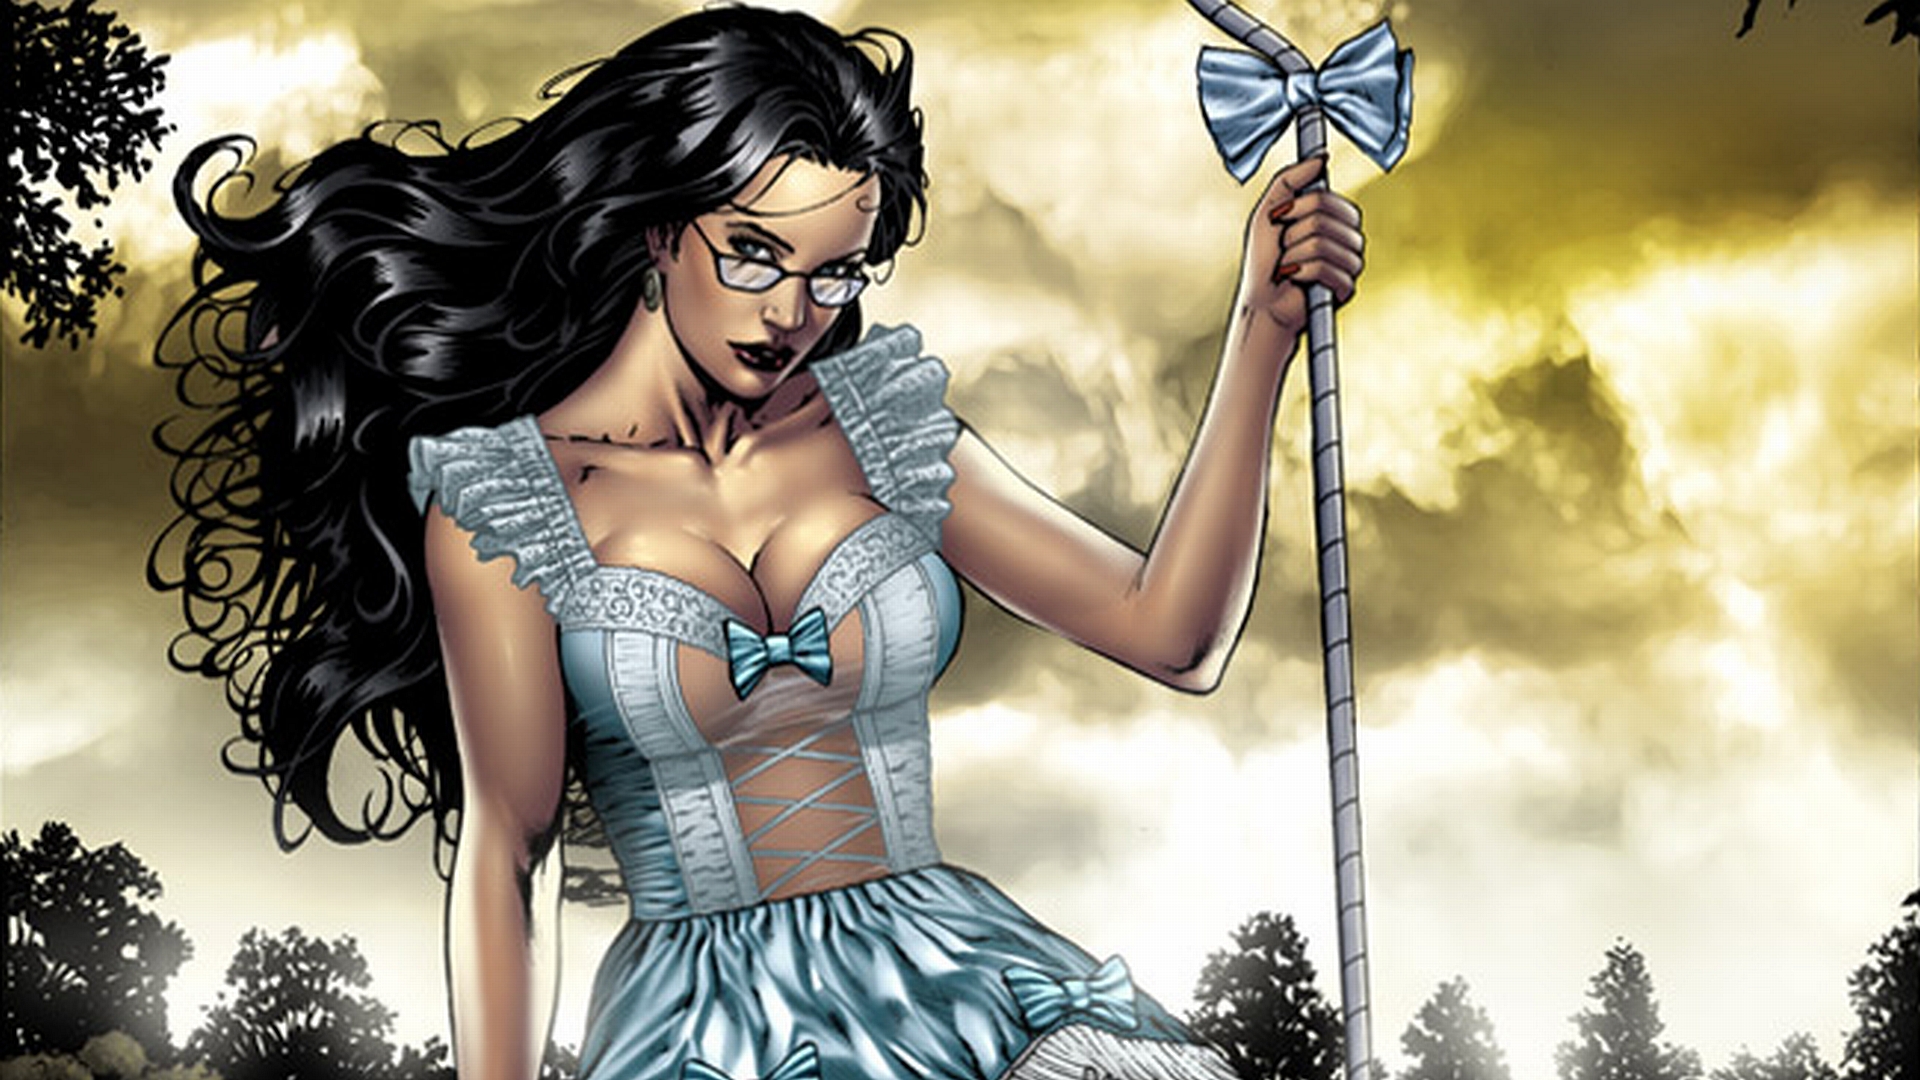 Little Bo Peep Hd Wallpaper - Different Seasons Grimm Fairy Tales Coloring Book , HD Wallpaper & Backgrounds